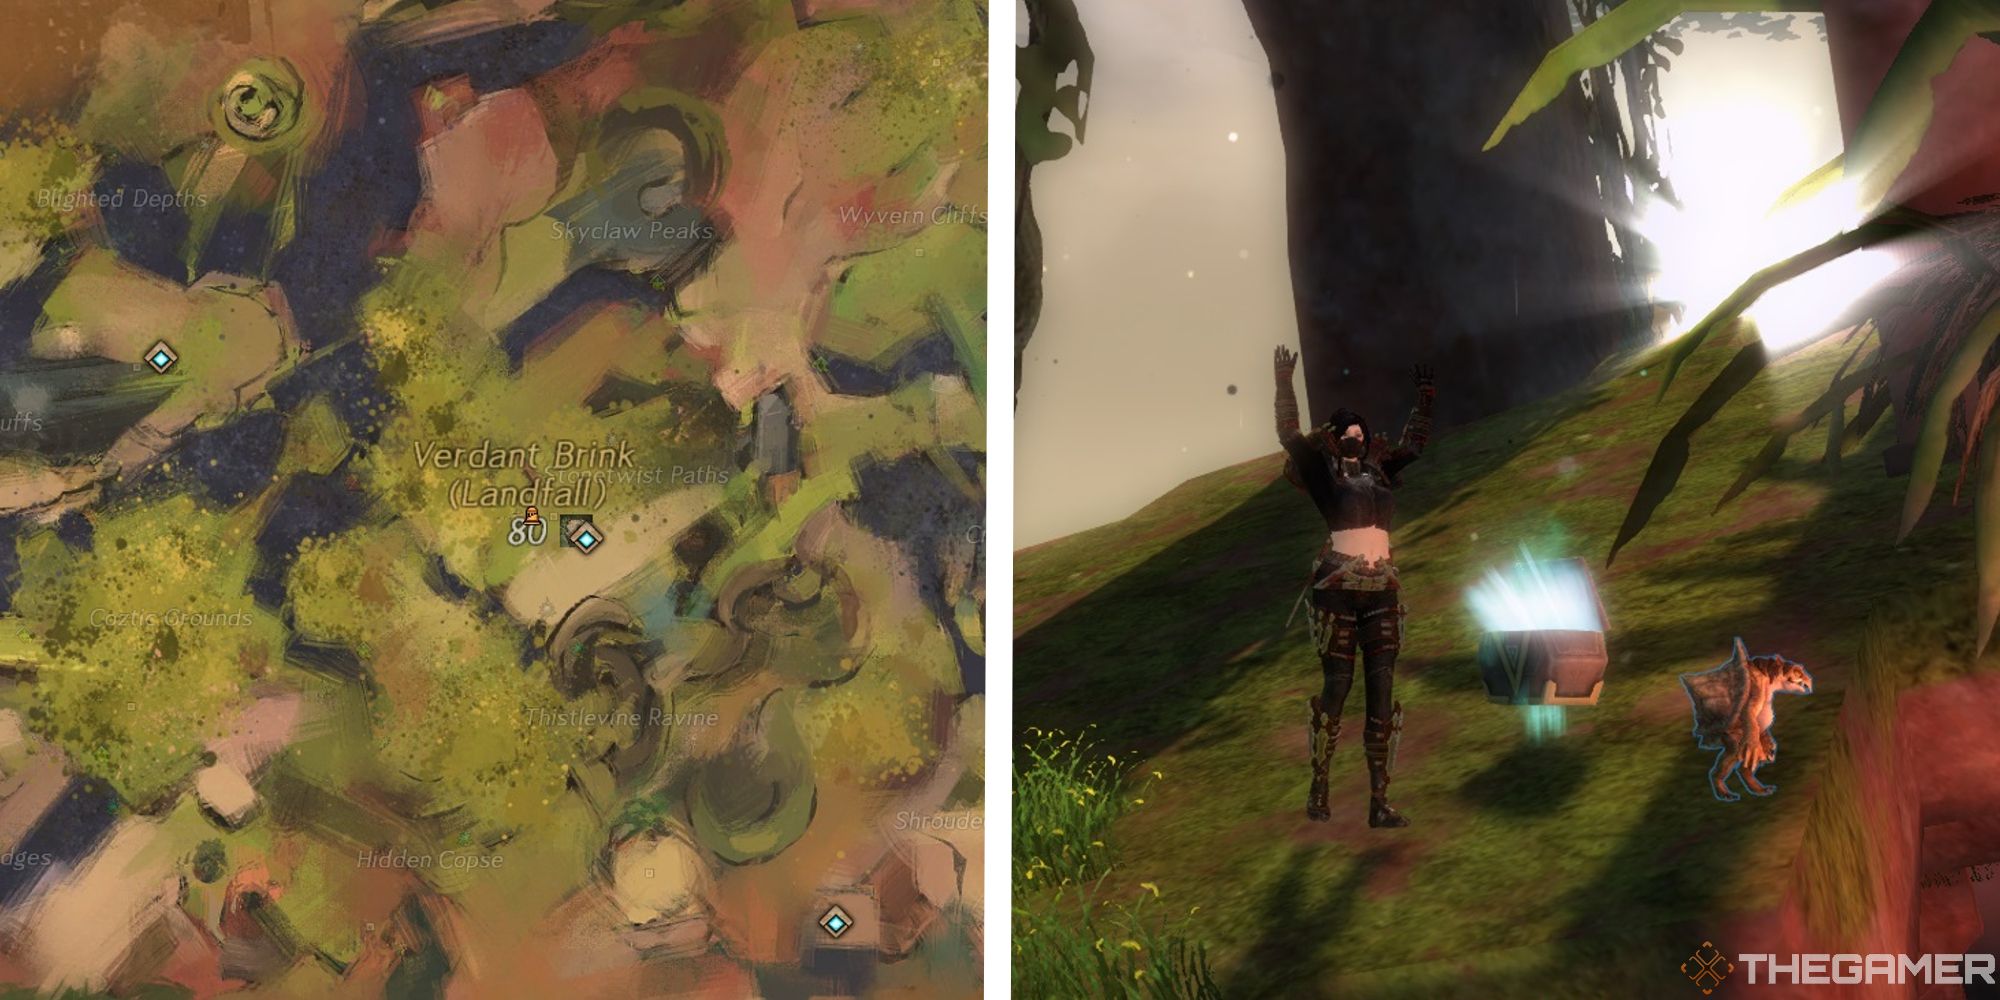 map of verdant brink next to image of player cheering next to a strongbox